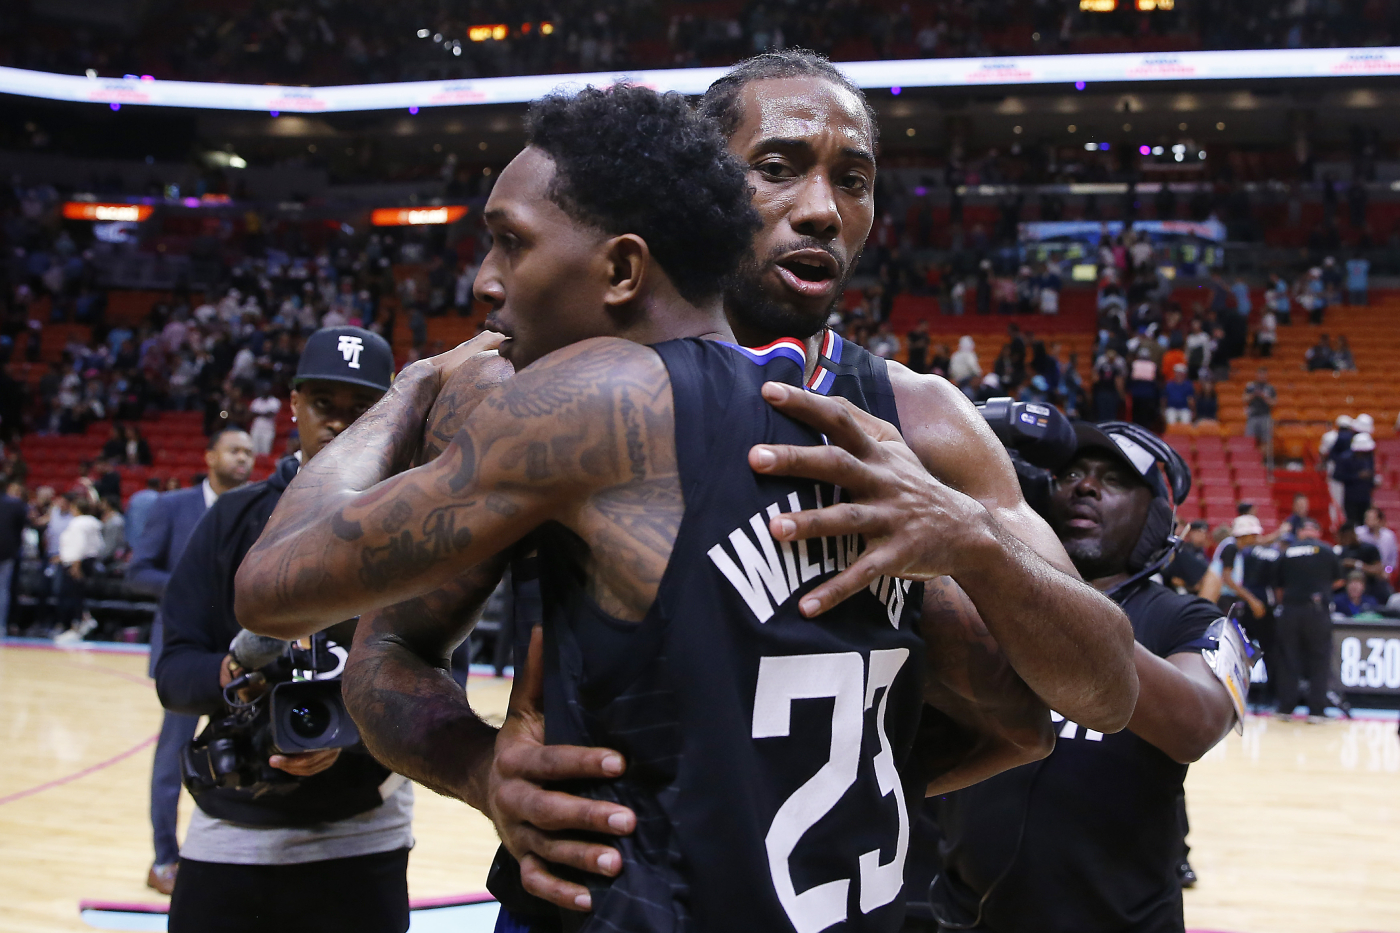 The LA Clippers have already lost Montrezl Harrell. Now, they could trade away their $8 million man, Lou Williams.